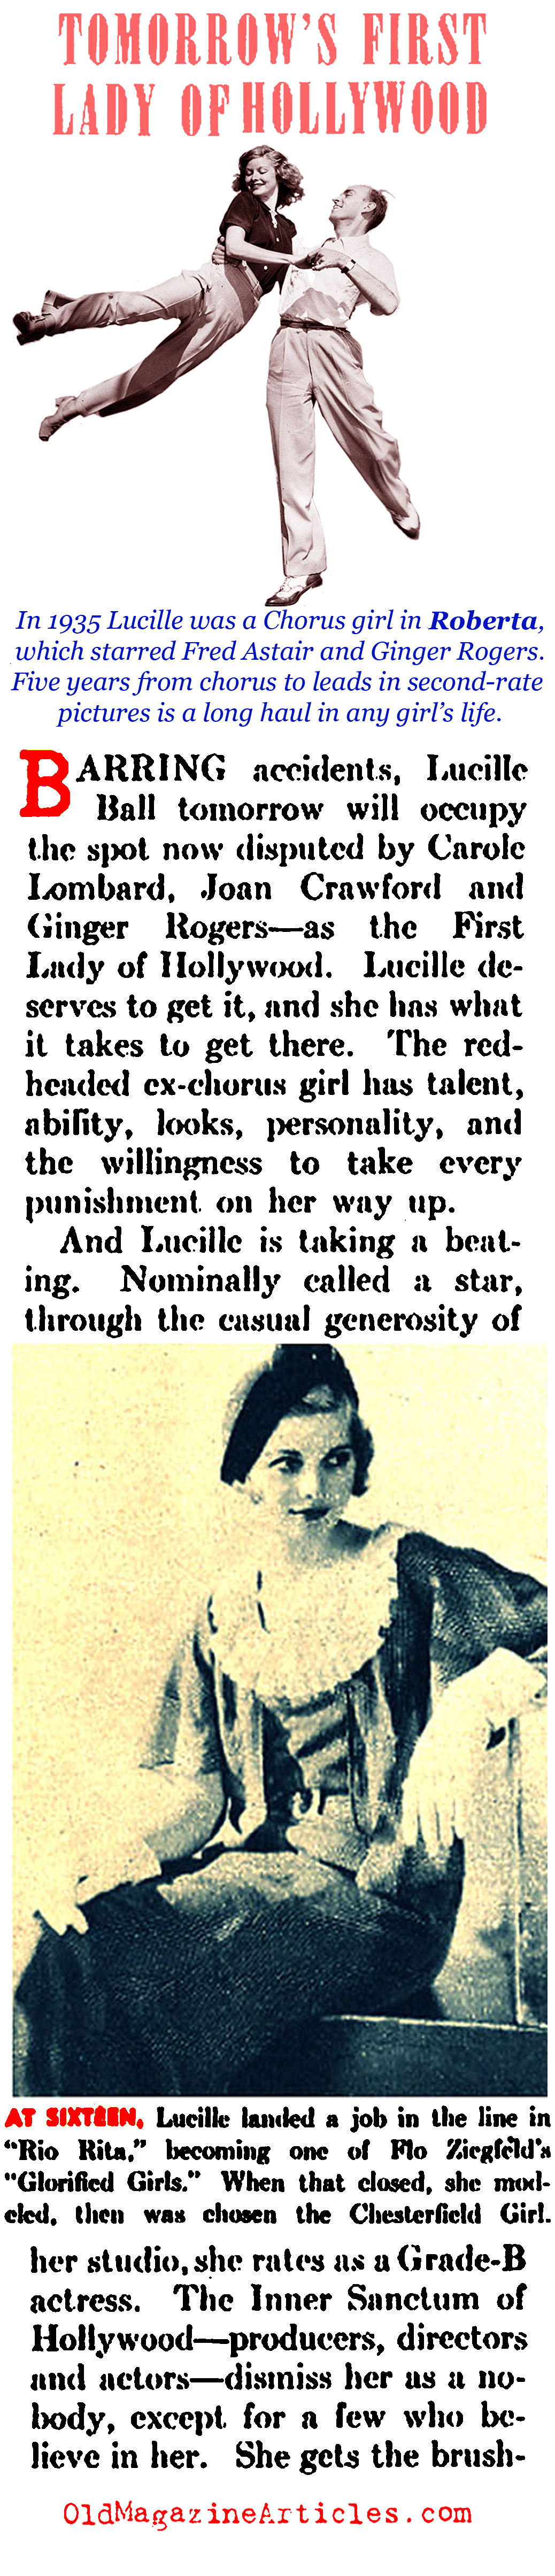 Lucille Ball Gets Noticed (Pic Magazine, 1940)